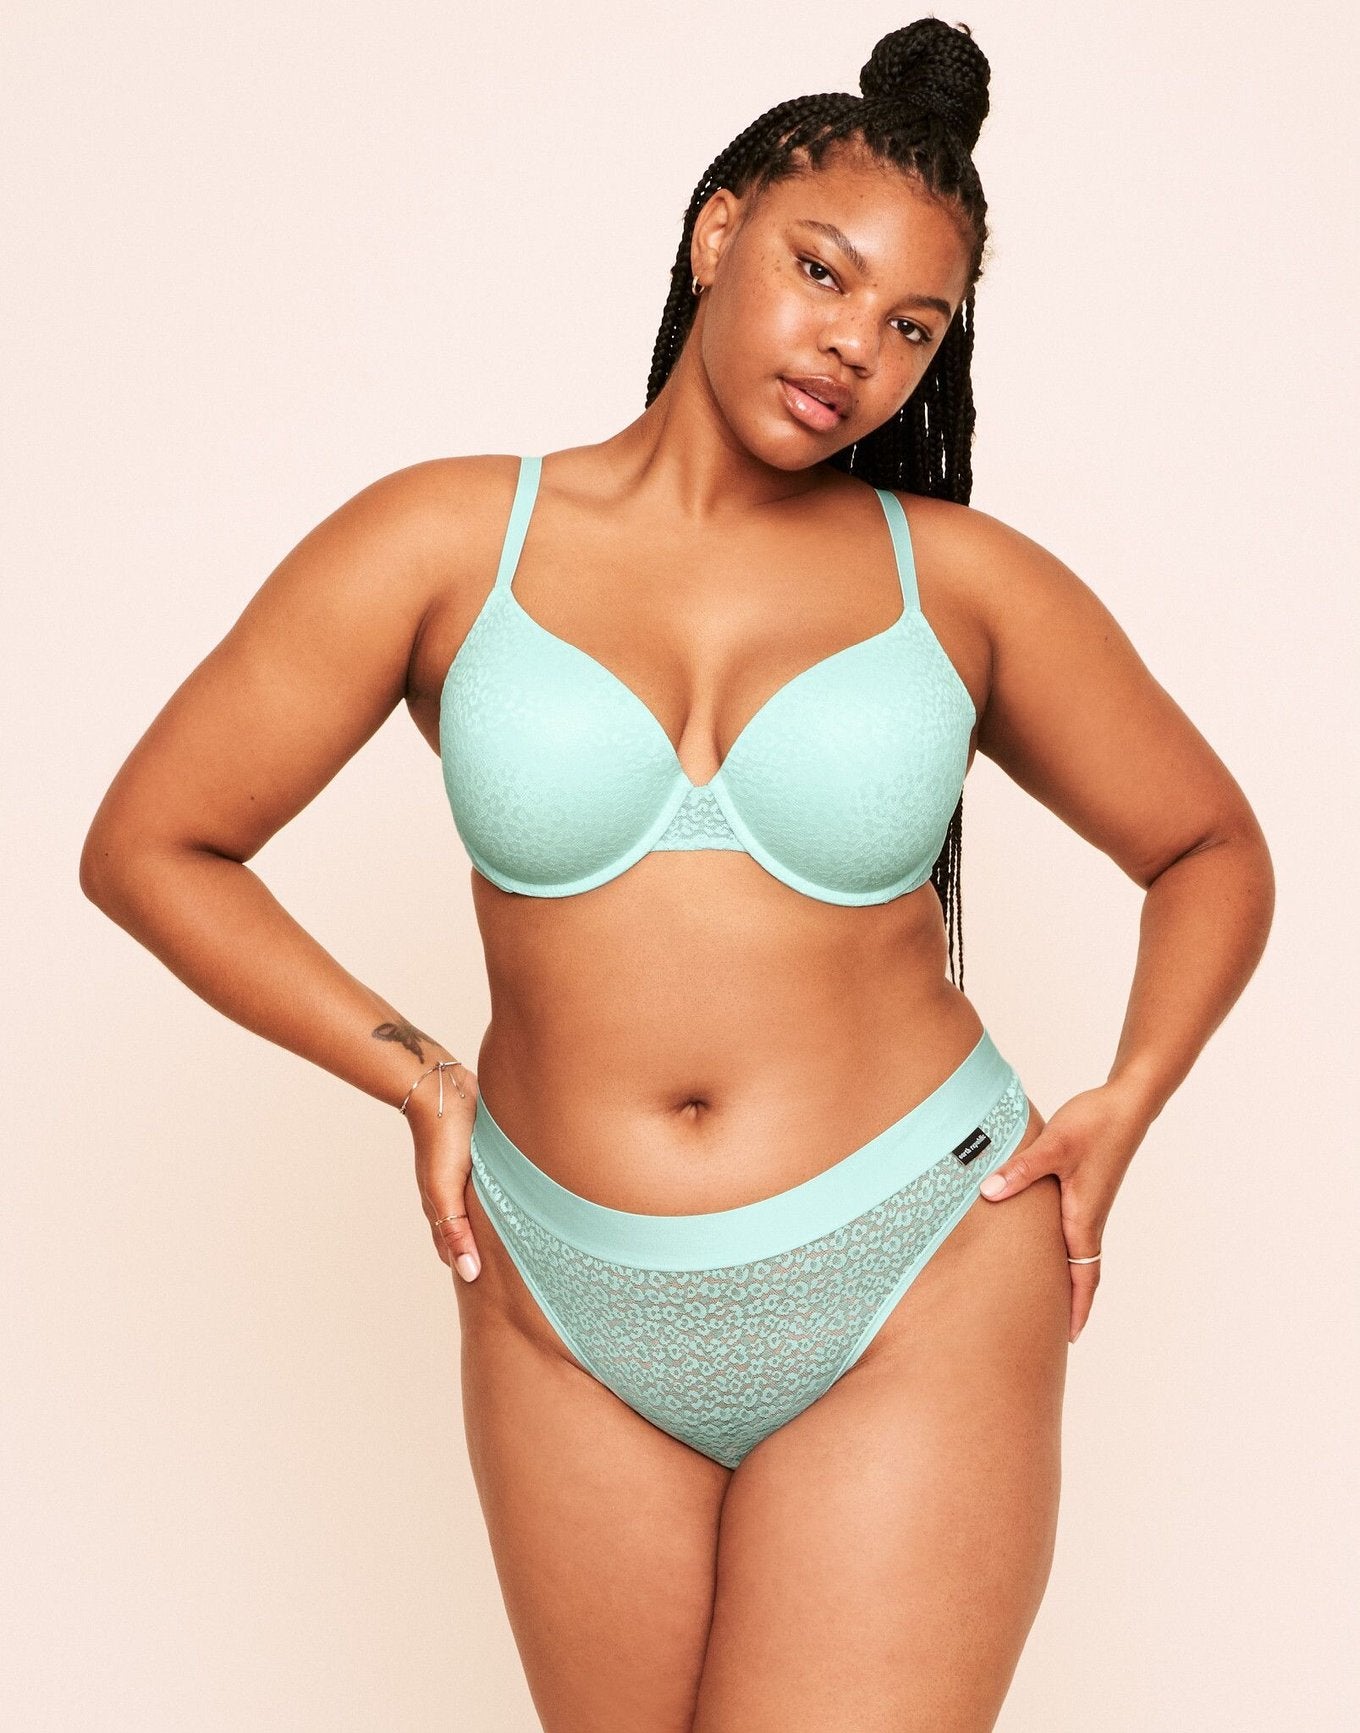 Earth Republic Dayana Lace Push Up Bra Lace Bra in color Bay and shape plunge